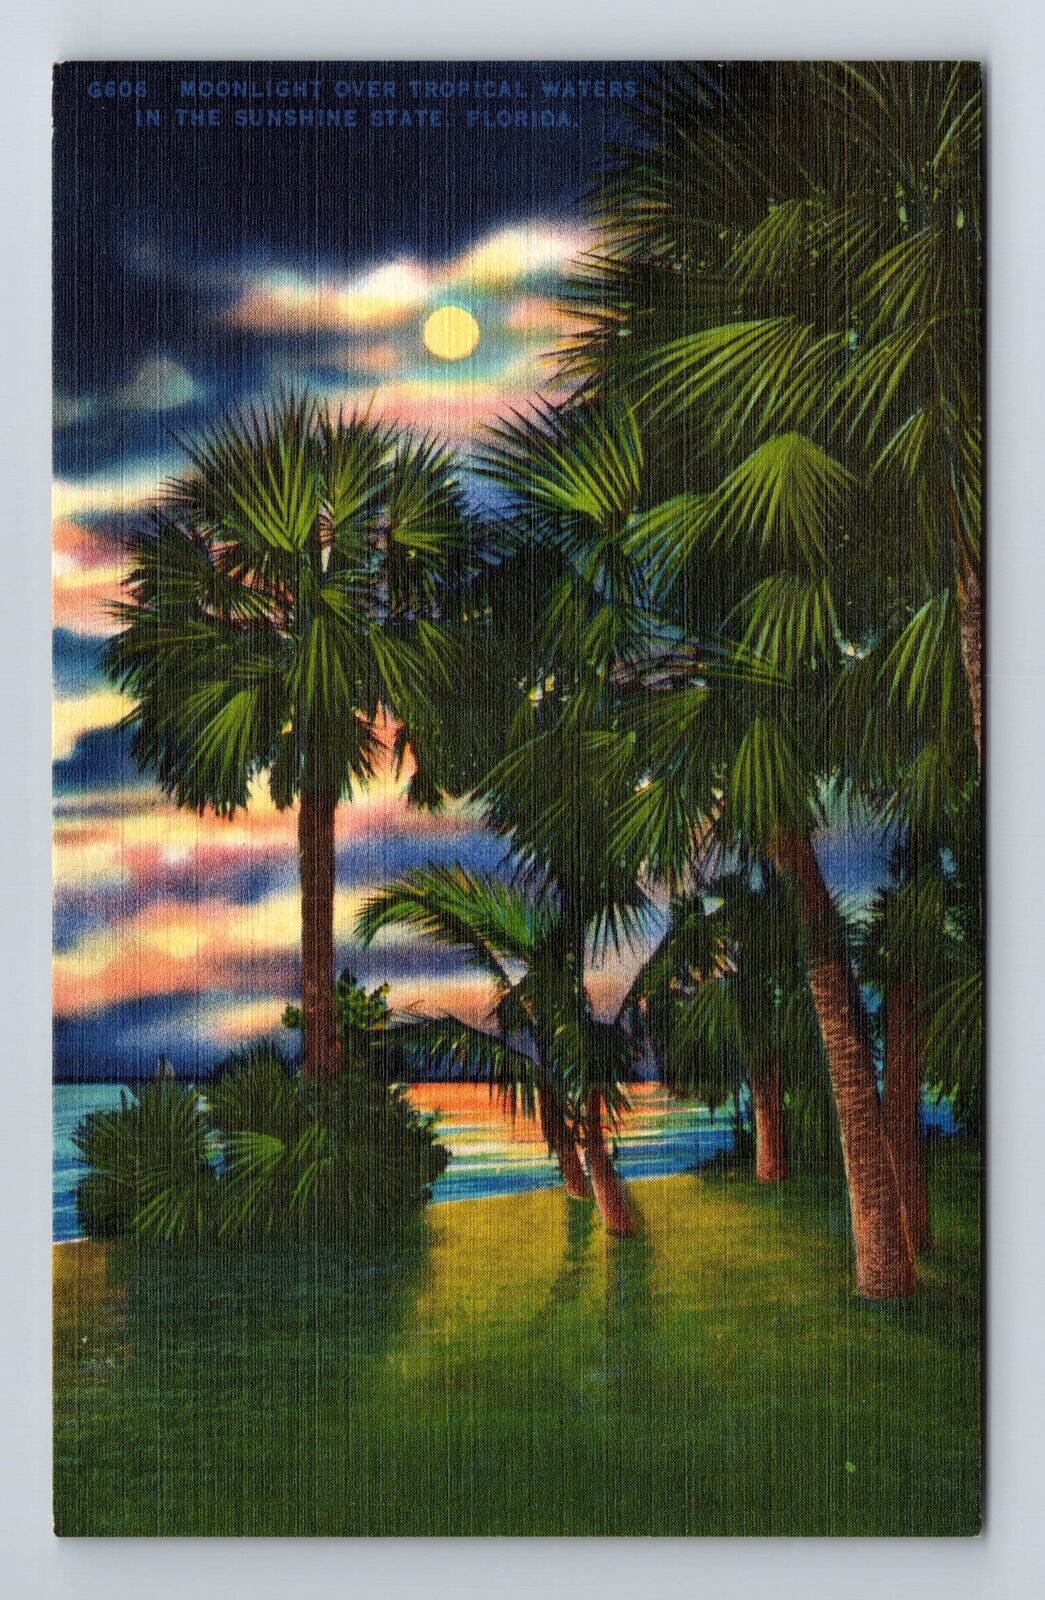 FL-Florida, Moonlight over Tropical Waters in Florida, Vintage Postcard